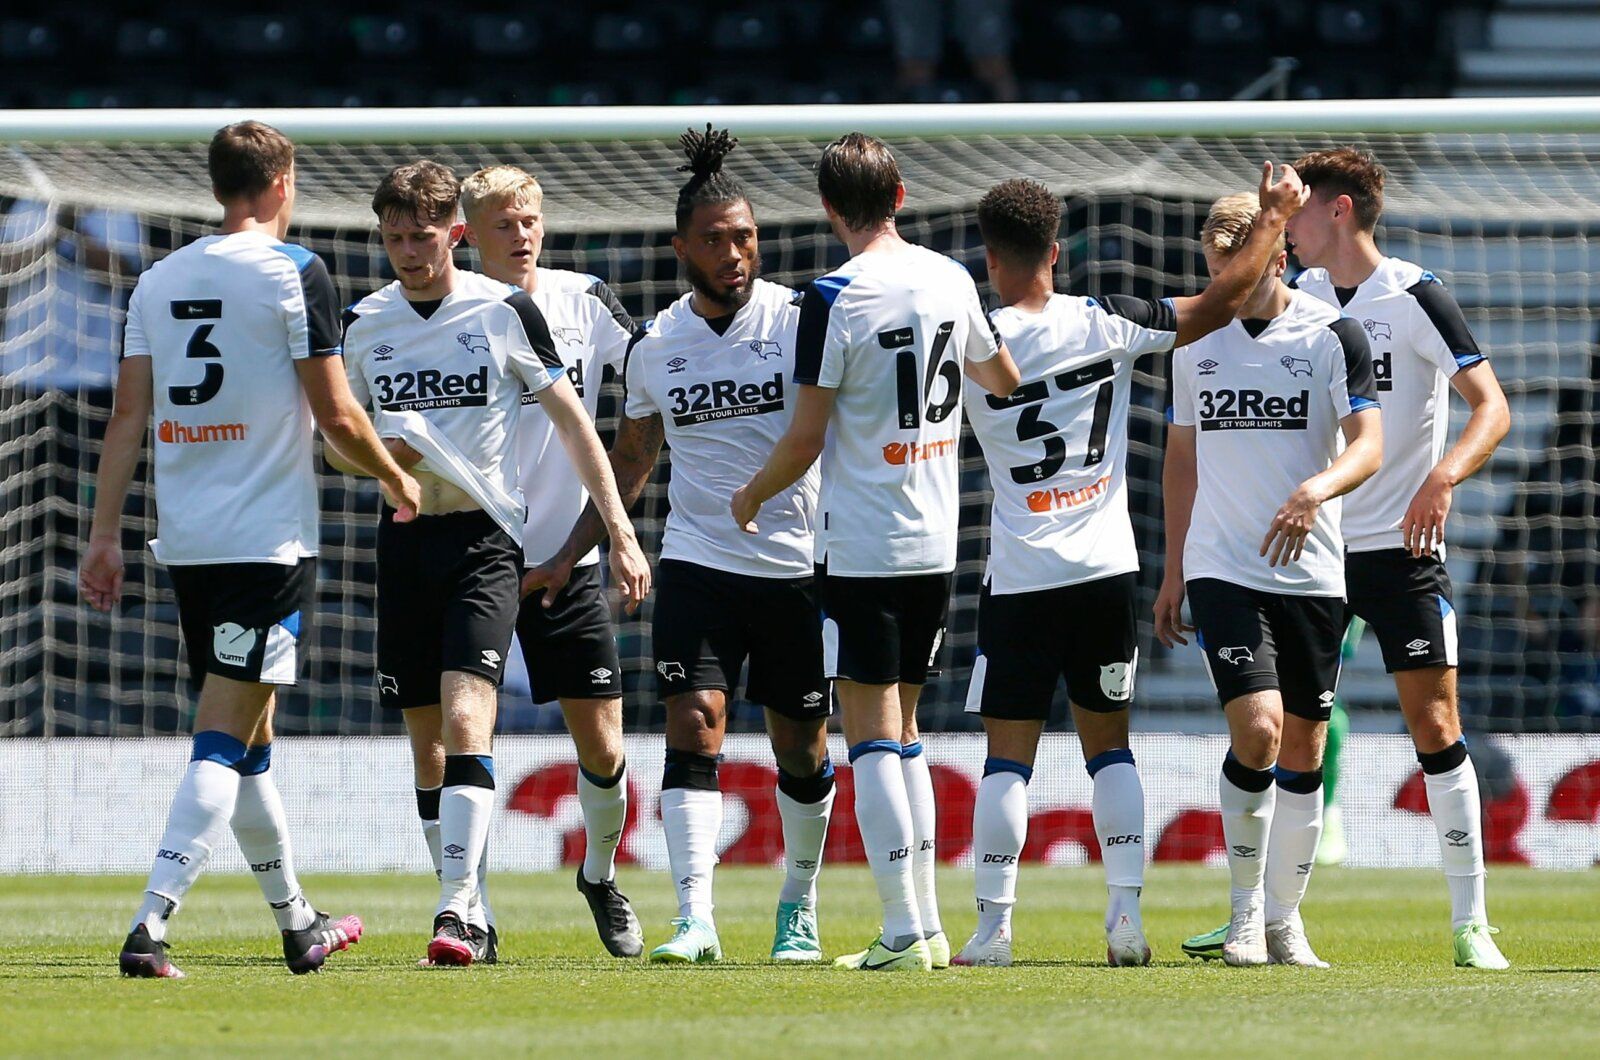 Soccer Football - Pre Season Friendly - Derby County v Manchester United - Pride Park, Derby, Britain - July 18, 2021 Derby County's Colin Kazim-Richards celebrates with teammates after scoring their first goal Action Images via Reuters/Craig Brough